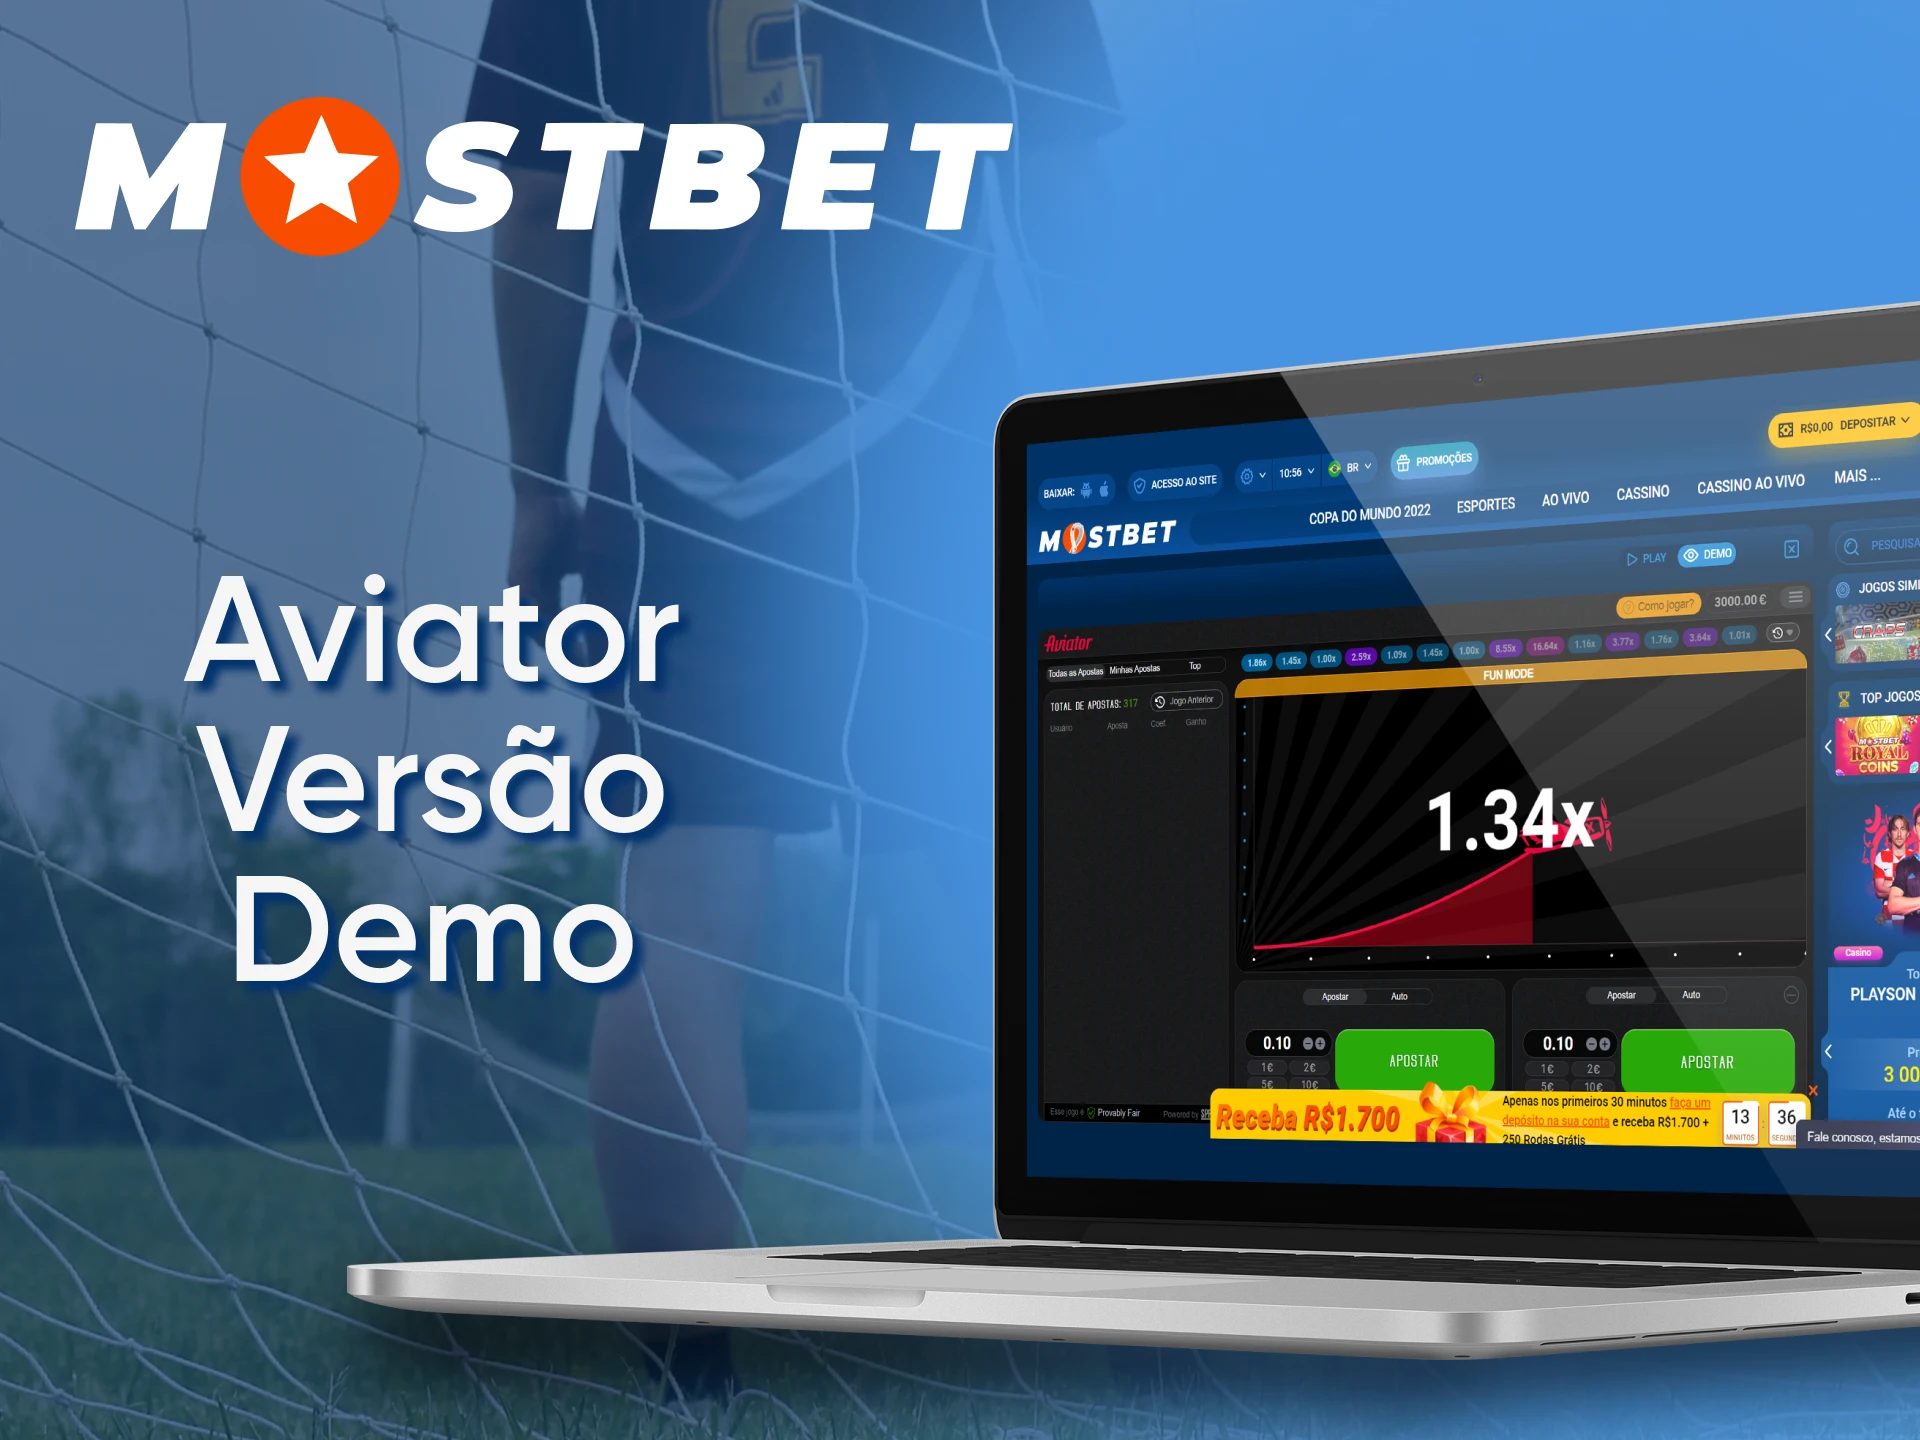 At Mostbet, you can try the demo version of Aviator.